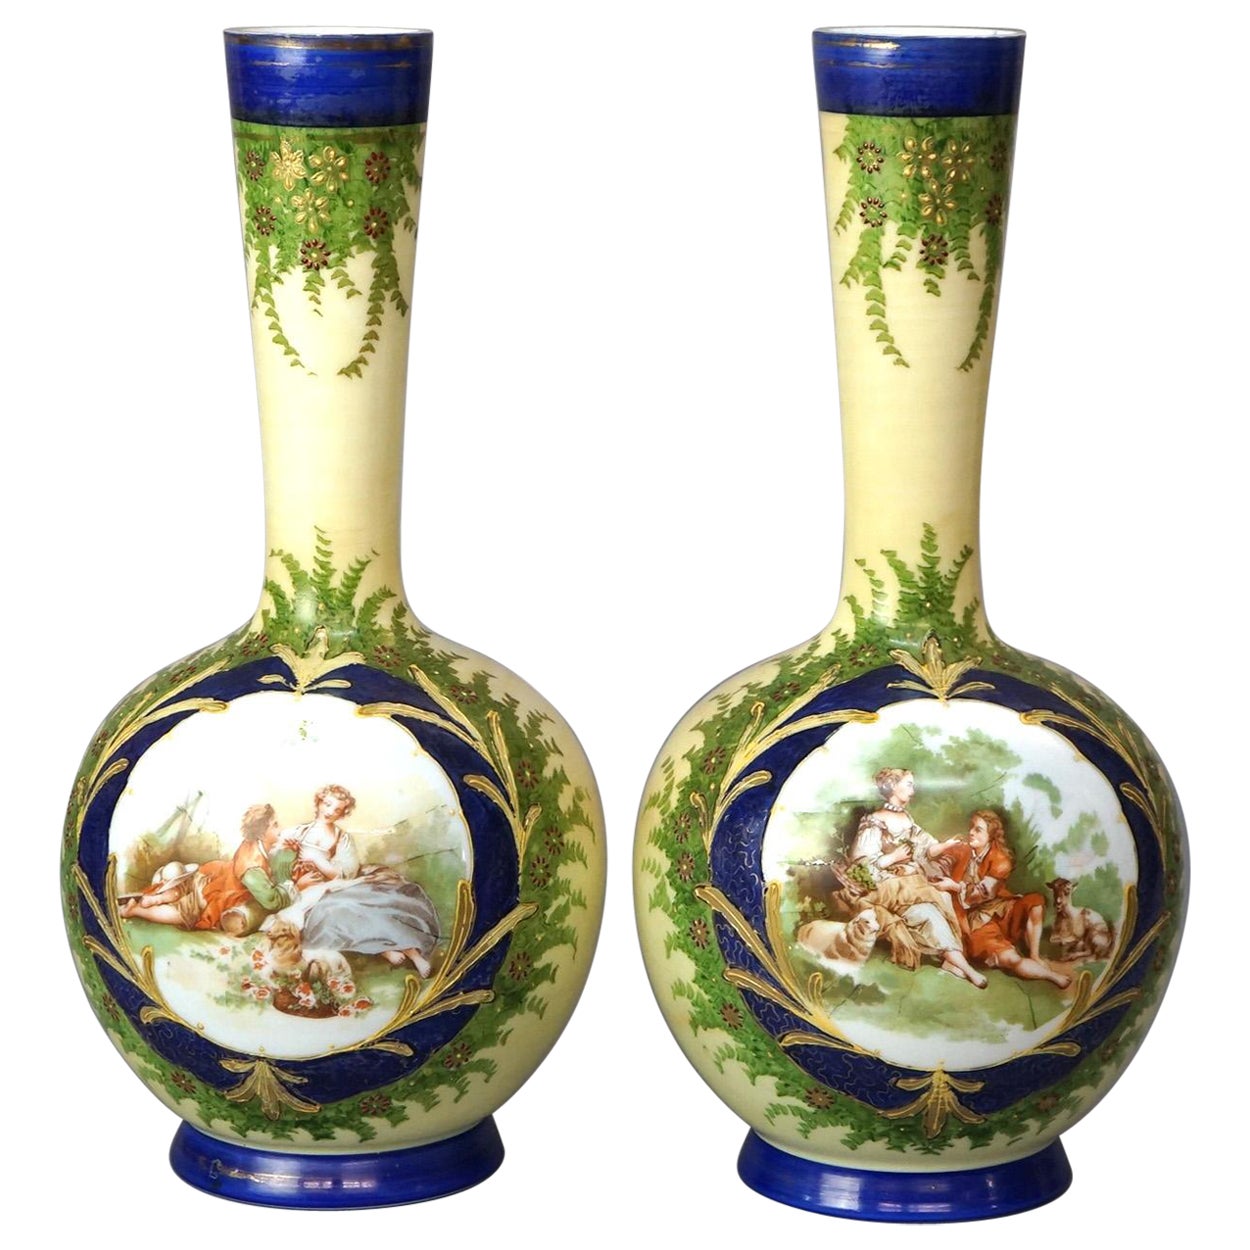 Antique Pair of Hand Painted Opaline Glass Vases with Courting Scenes C1890